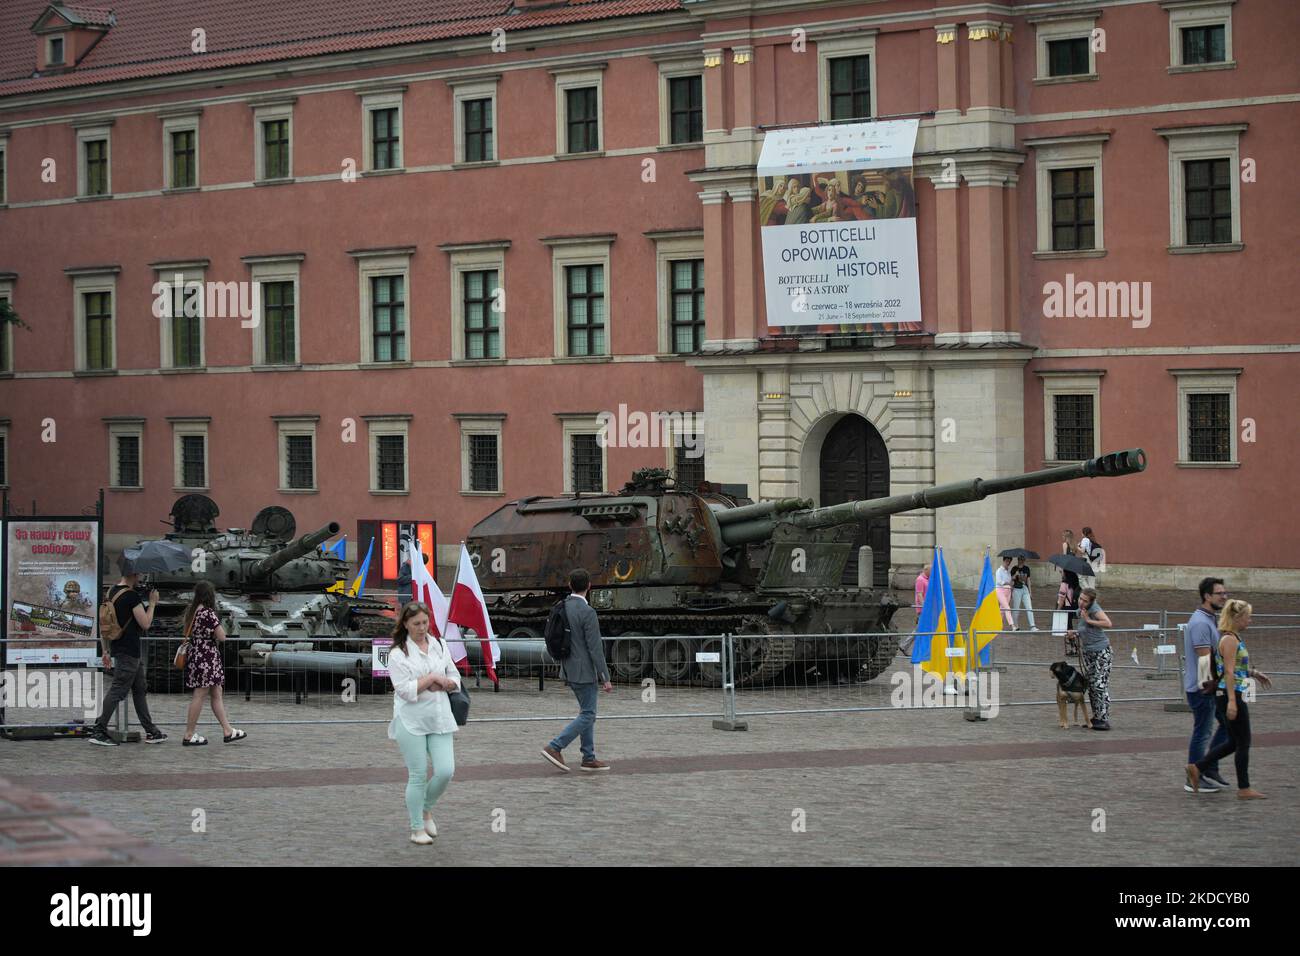 Russian tanks are seen on display near the Royal Castle in Warsaw, Poland on 28 June, 2022. Two destroyed Russian army tanks are on display on the Castle Square in the Old Town after having been transported from Ukraine. One of the tanks, a T-72 was destroyed in the Bucha district near Kyiv where in march the Russian army committed mass executions of civilians. The second tank on display is a 2S19 Msta self-propelled Howitzer weighing around 42 thousand kilos. (Photo by STR/NurPhoto) Stock Photo